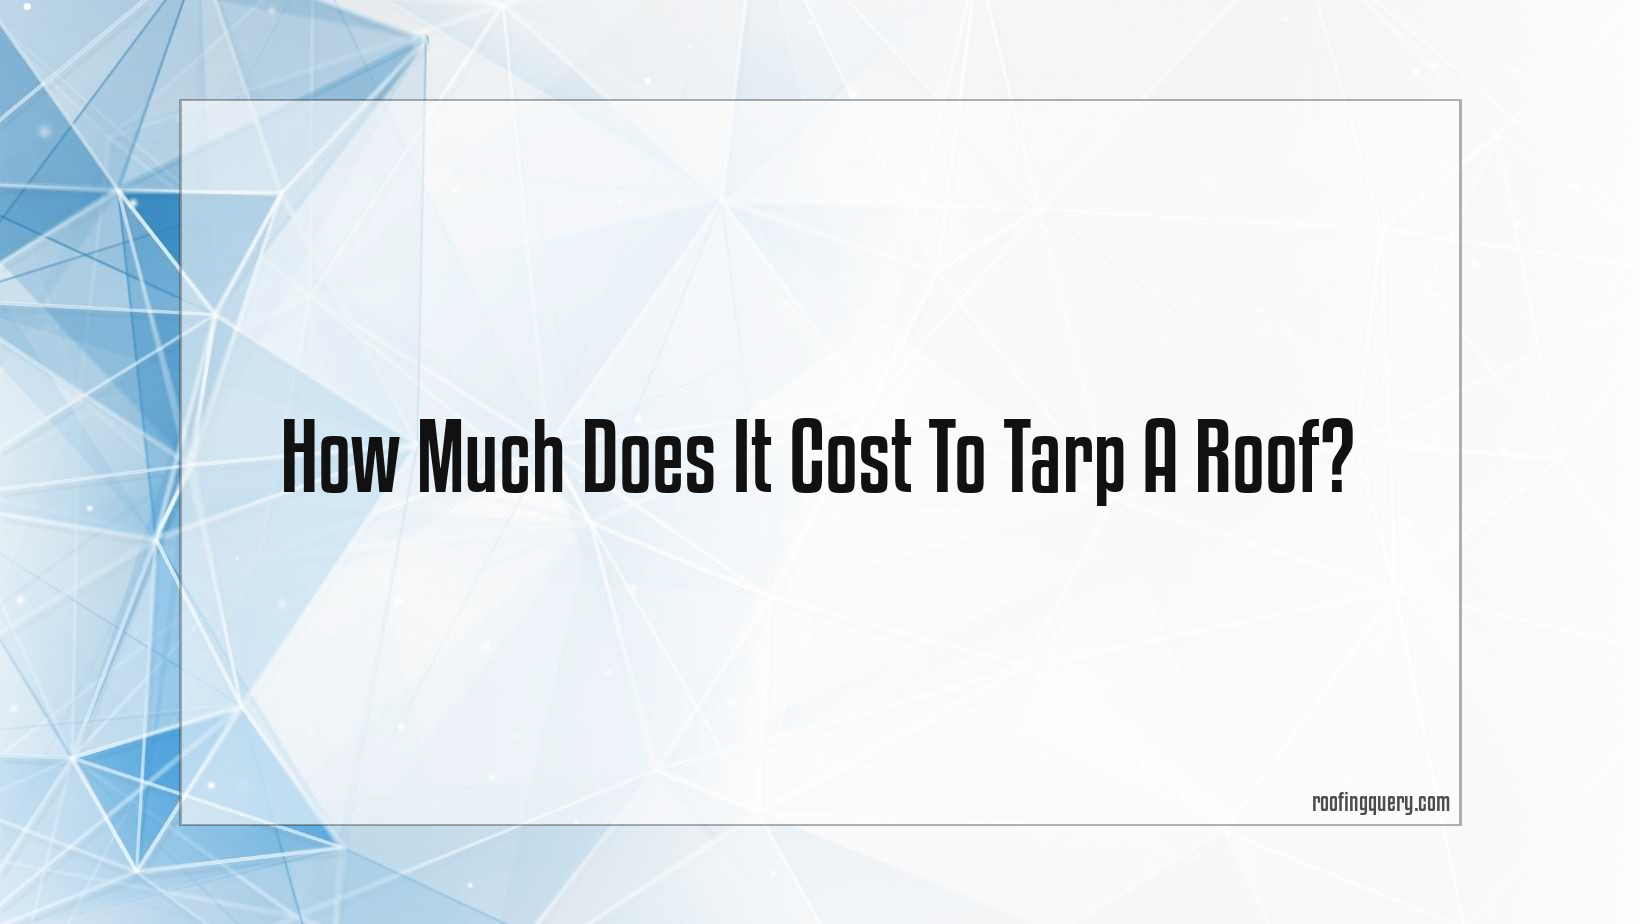 How Much Does It Cost To Tarp A Roof?